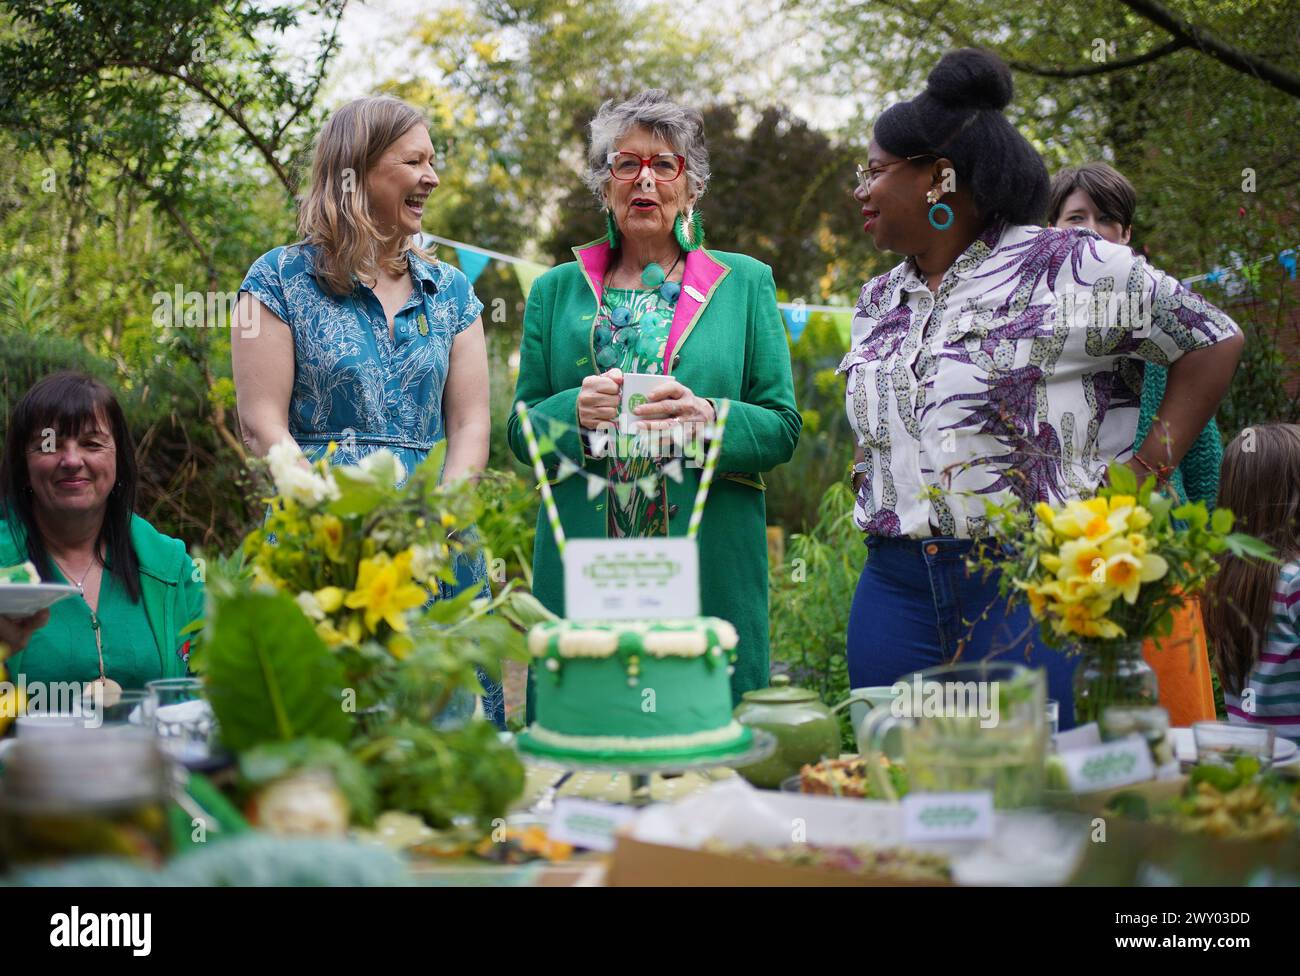 Prue Leith attends the launch event for this year's The Big Lunch at the Phoenix Garden, a community garden in London. The Big Lunch, on June 1-2, encourages community gatherings which raise money for good causes and gets people together. £87m has been raised for good causes at Big Lunch events since 2015. Picture date: Wednesday April 3, 2024. Stock Photo